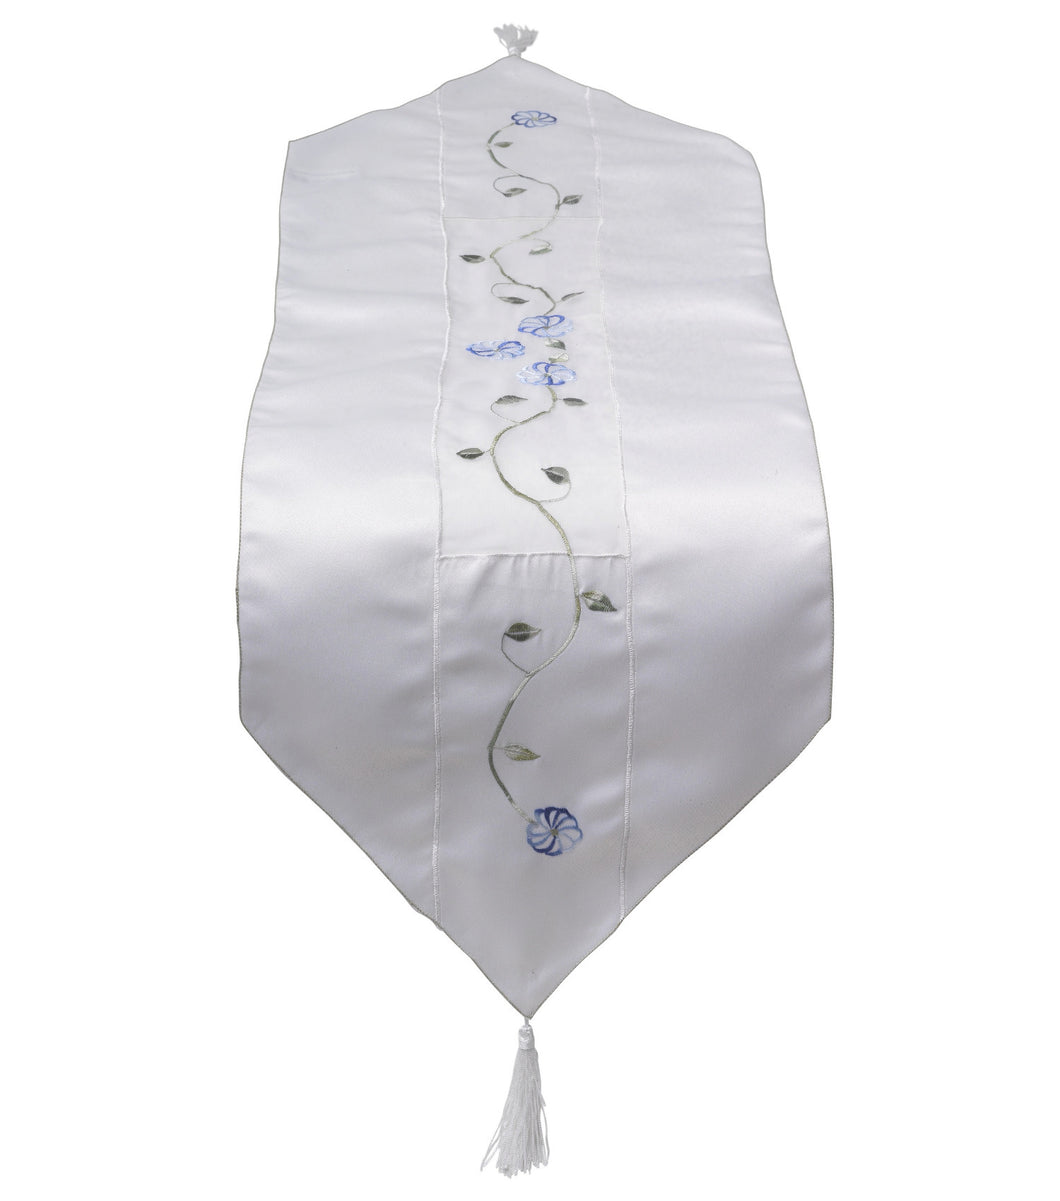 Clematis Embroidered Flower Table Runner with Organza Panel 12 x 36